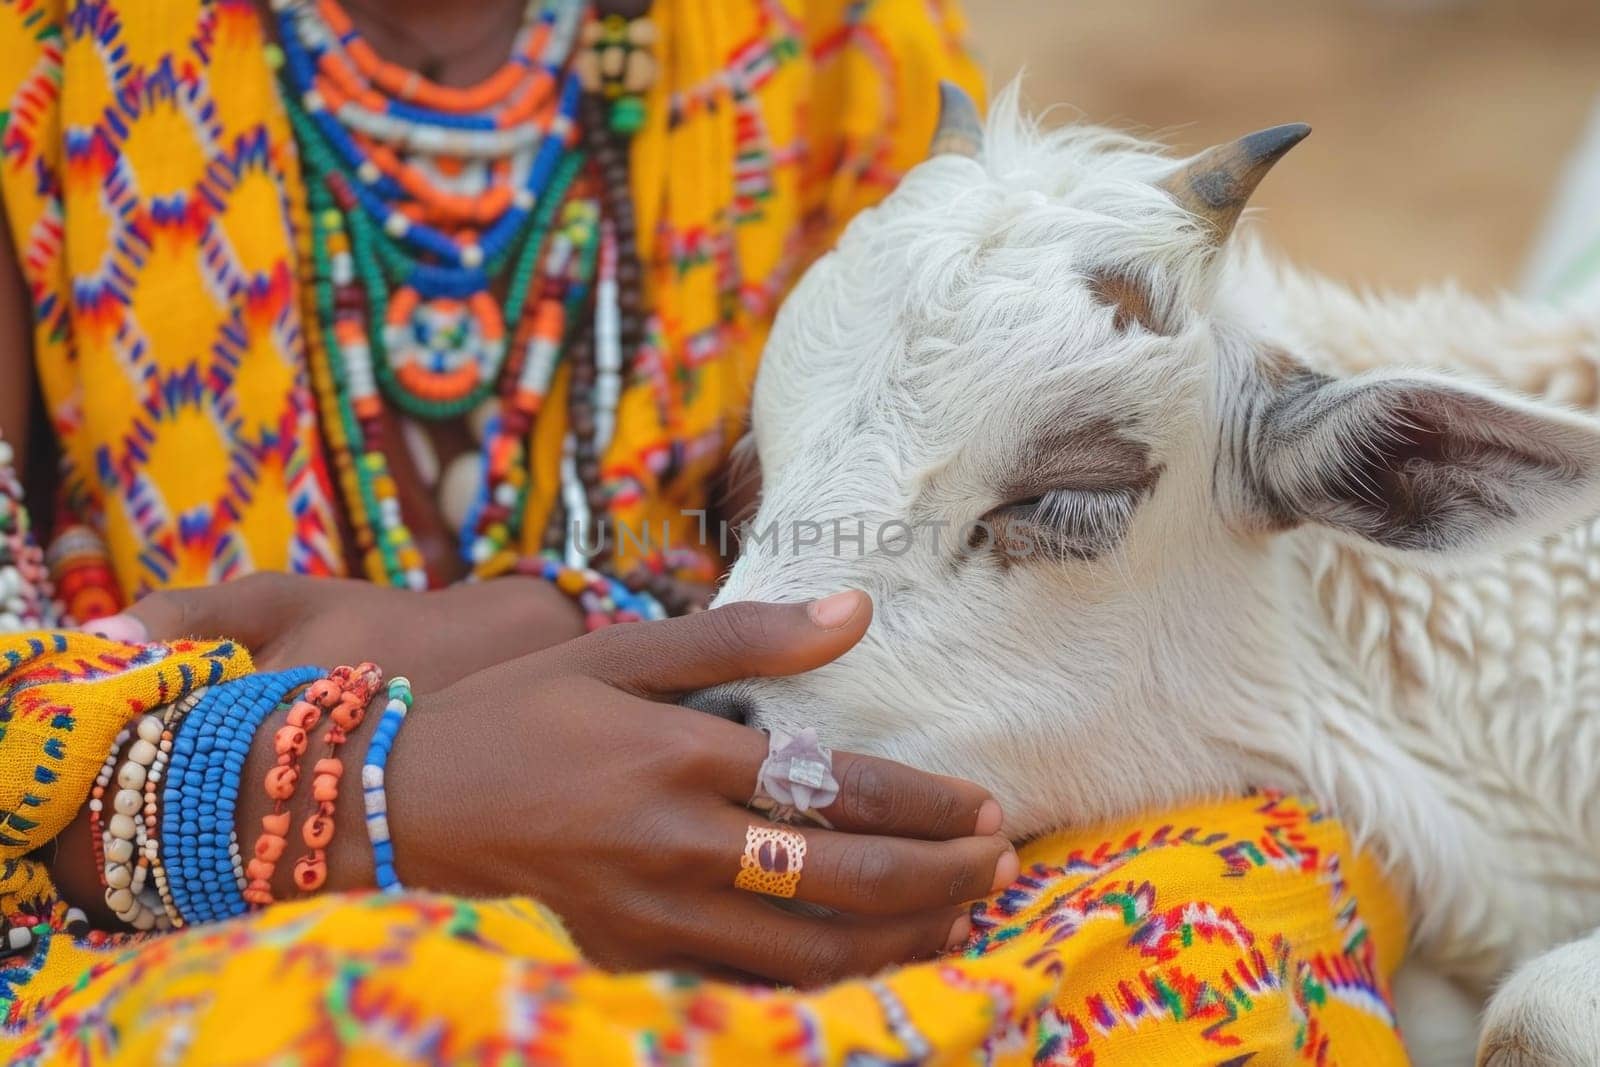 In the picture, a woman in yellow gently pets a white goat, in an artistic scene filled with joy and connection